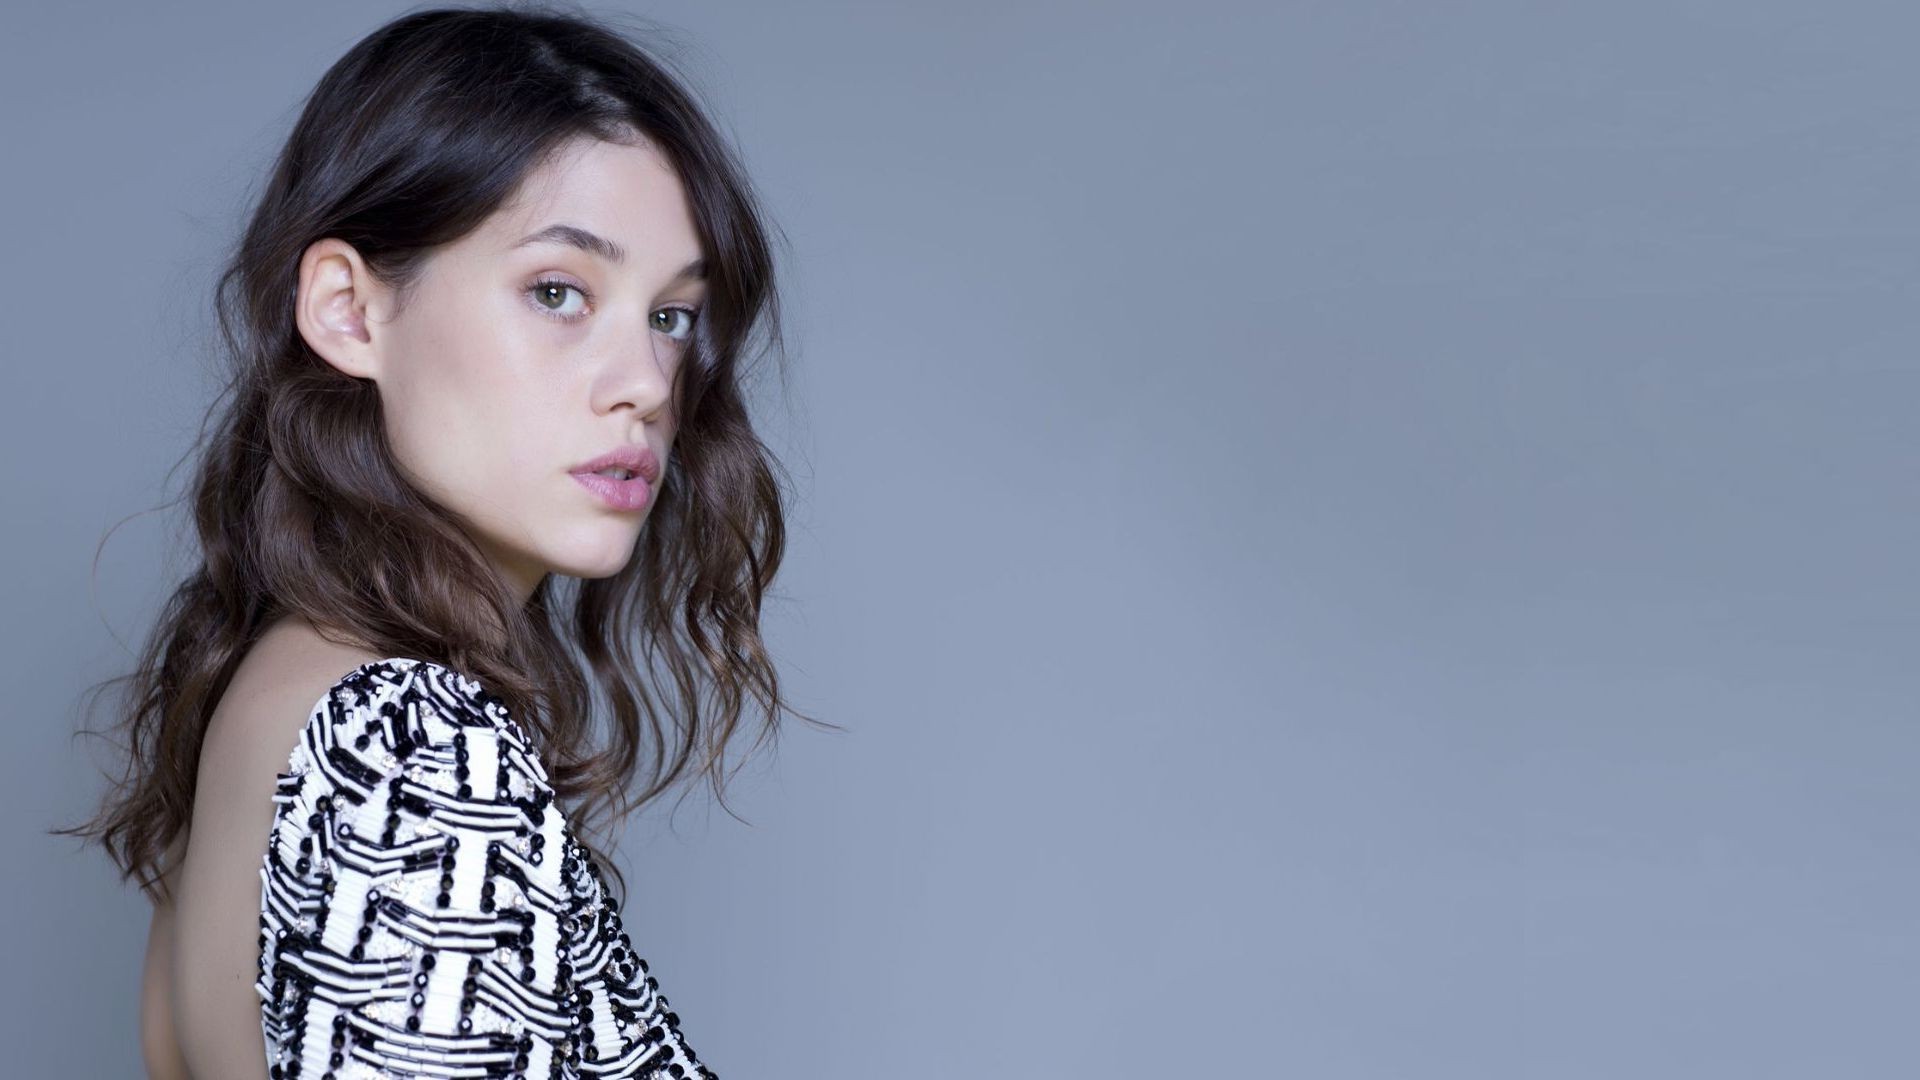 Astrid Berges Frisbey, Model Wallpapers HD / Desktop and Mobile Backgrounds